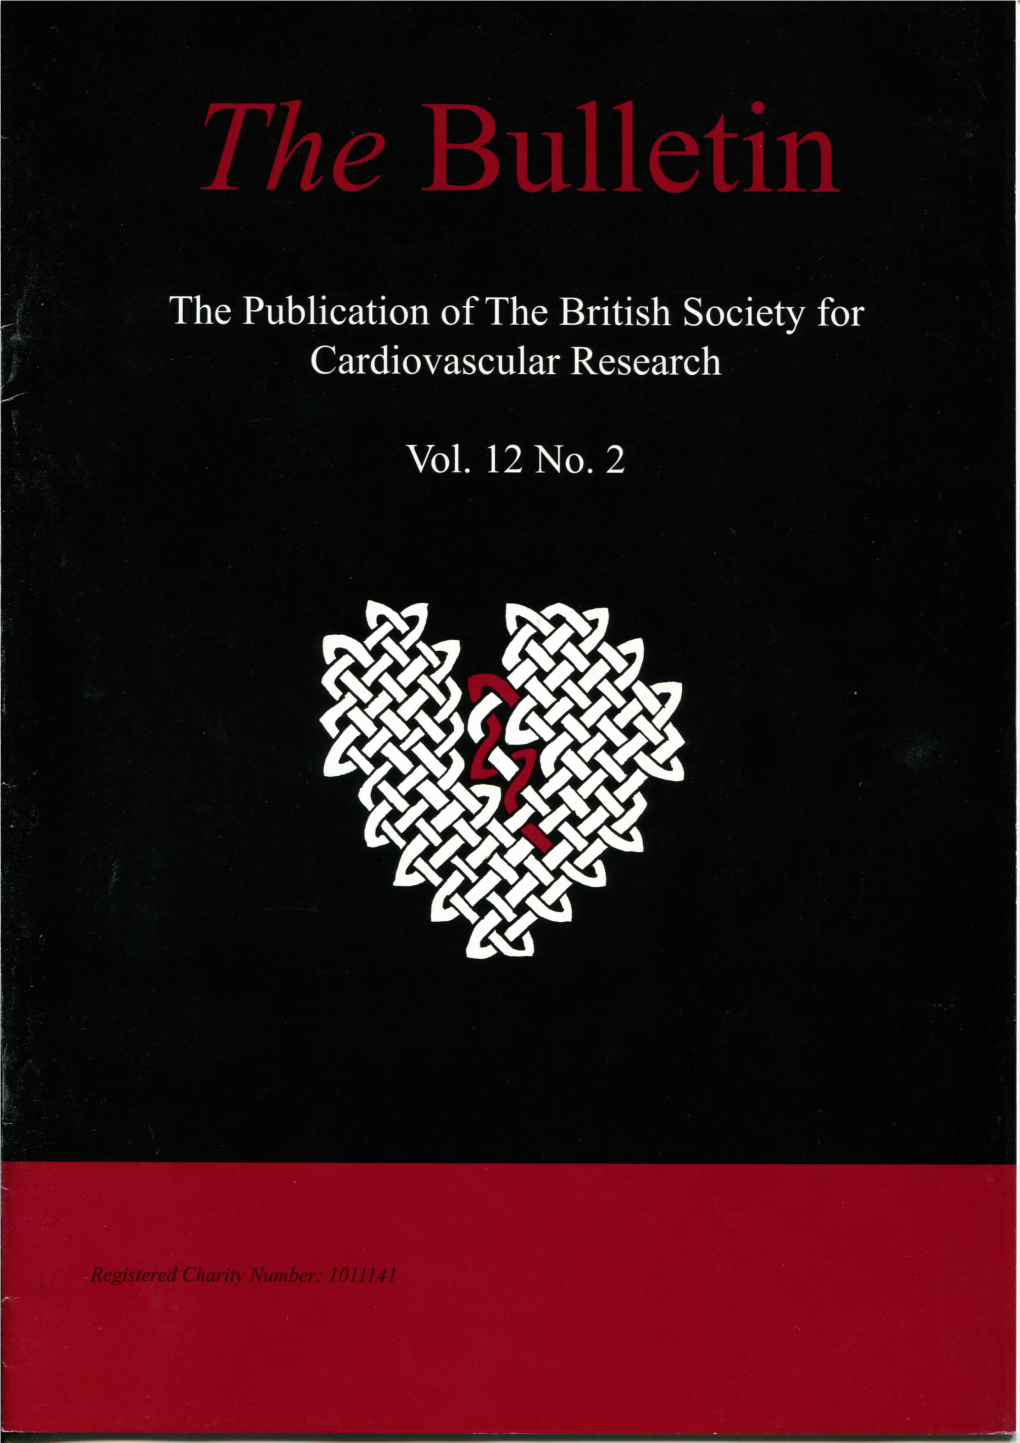 The Publication of the British Society for Cardiovascular Research Vol